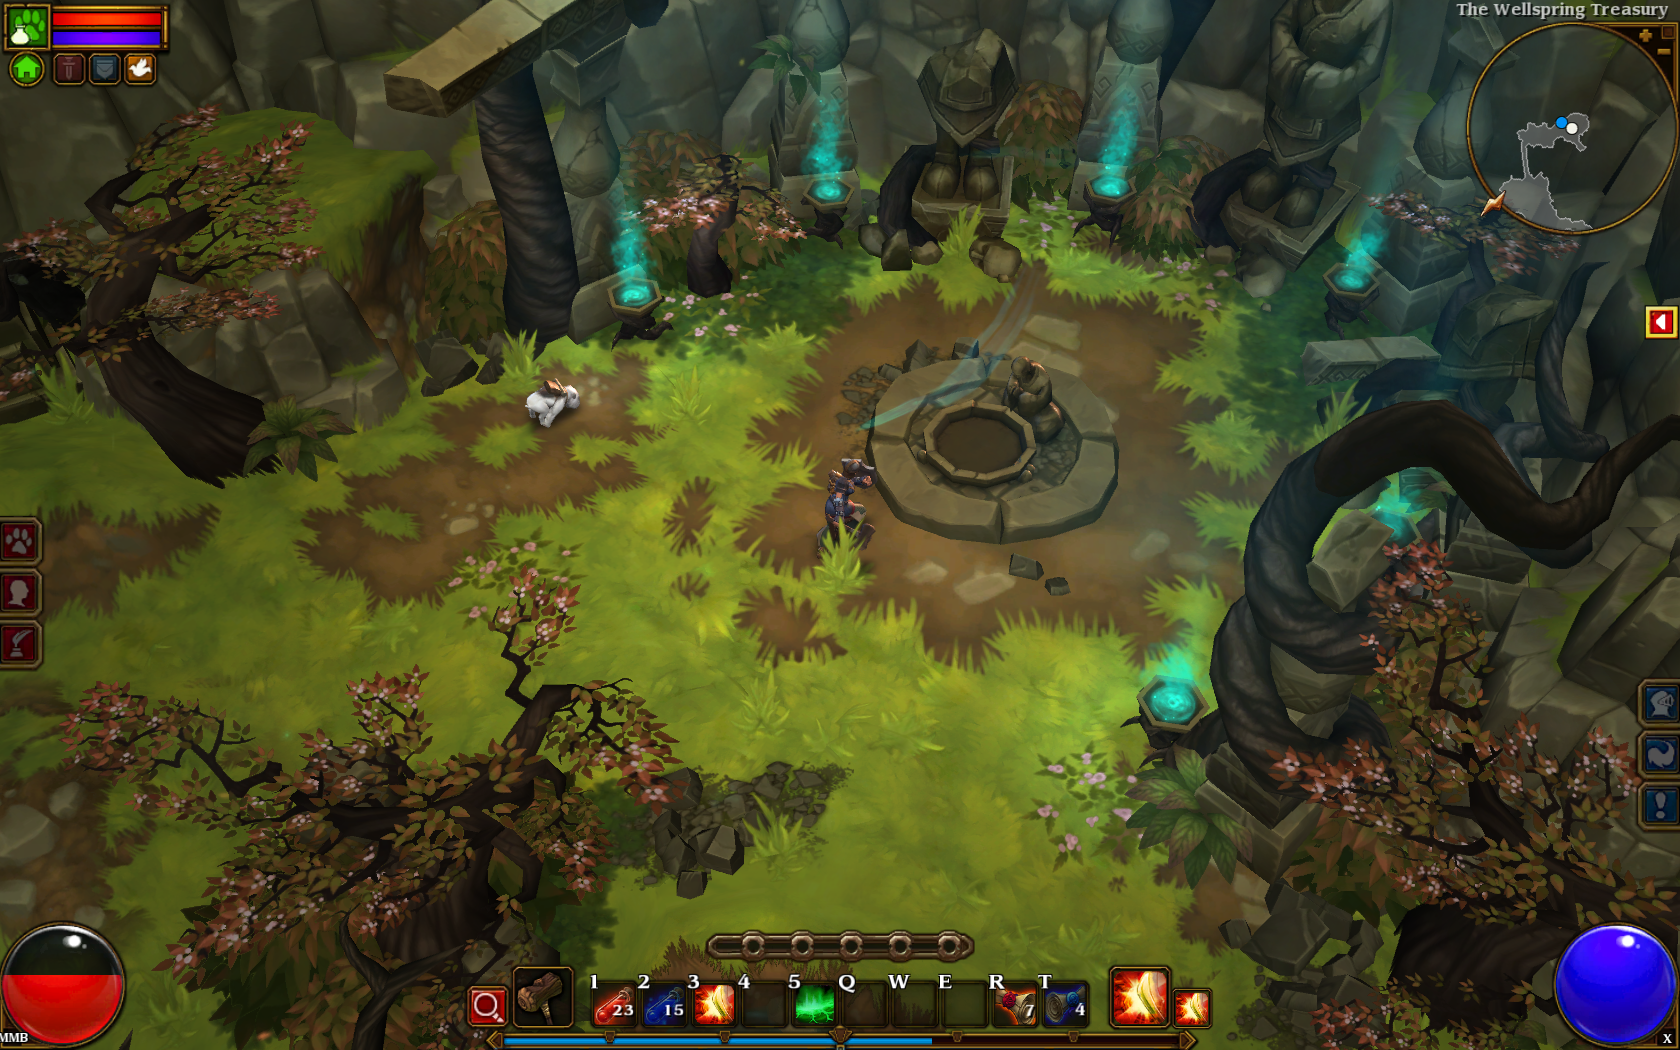 torchlight 3 free download